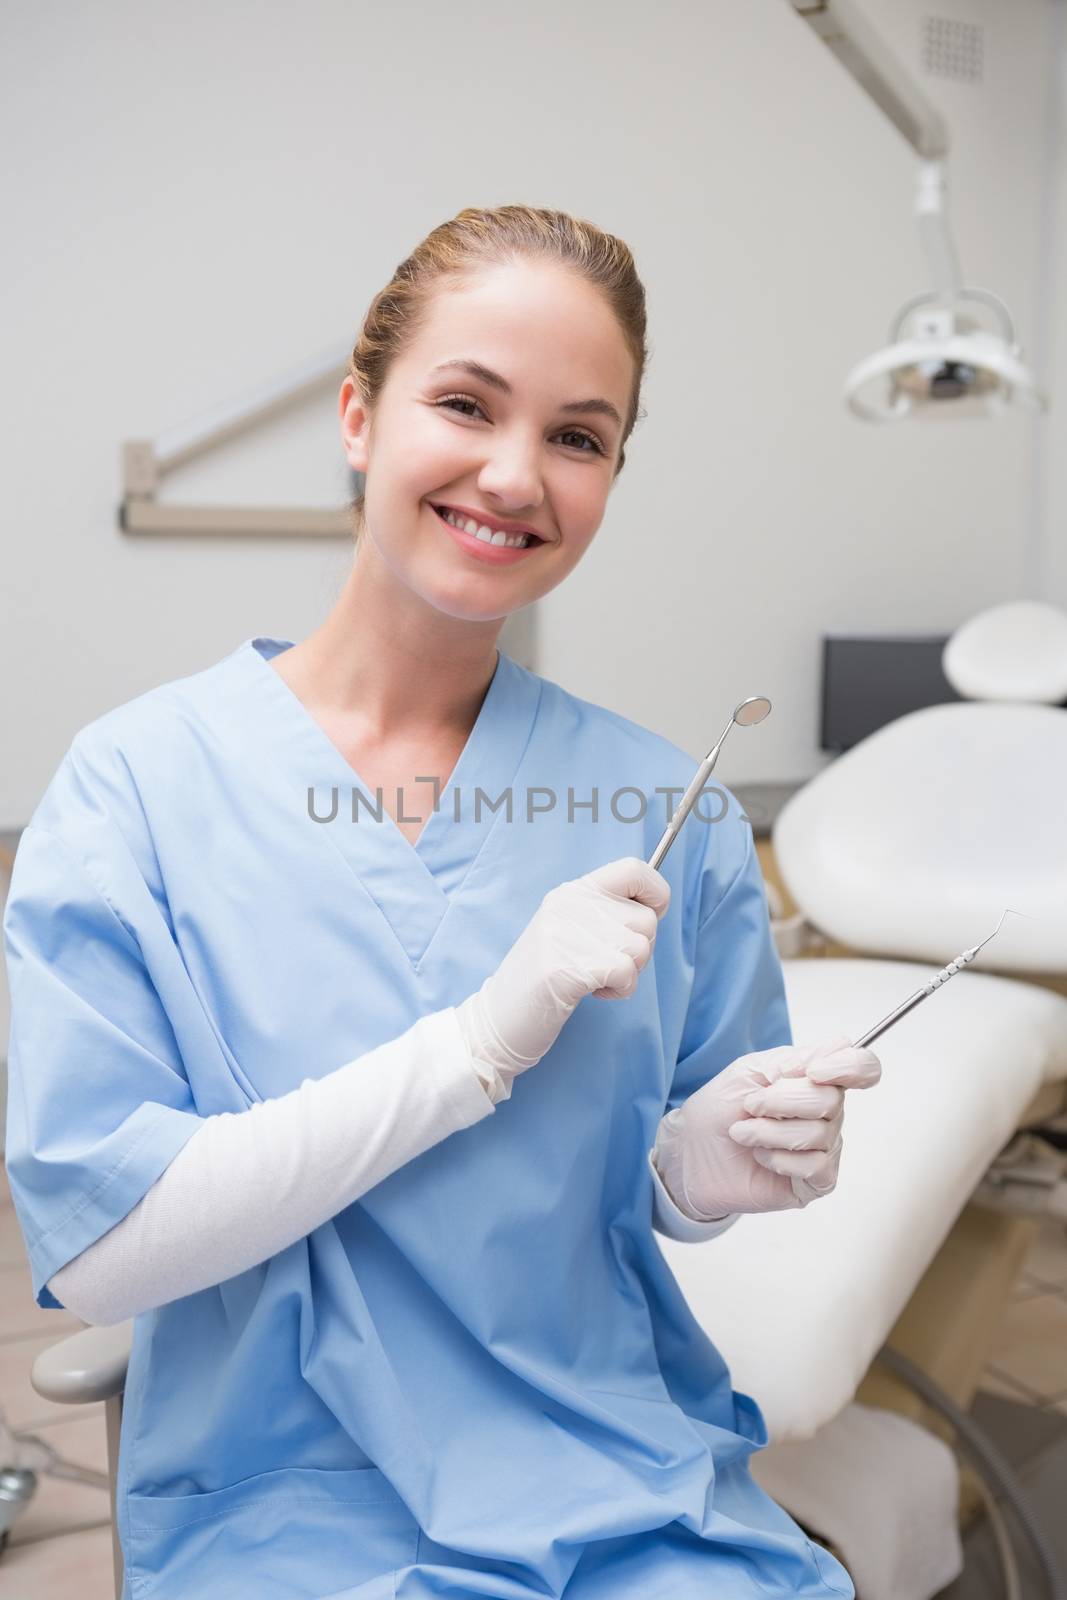 Dentist in blue scrubs smiling at camera holding tools by Wavebreakmedia